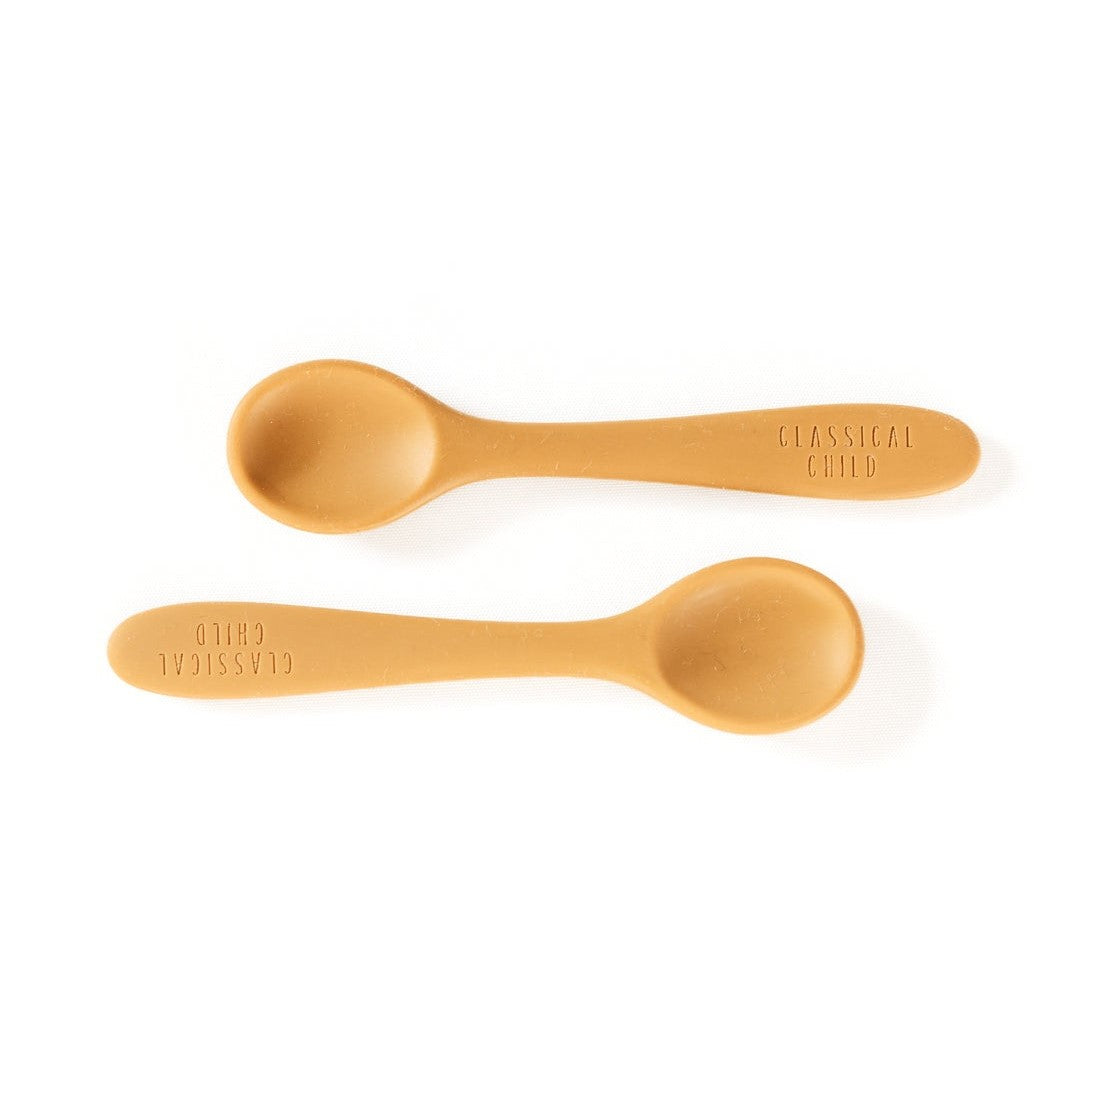 Classical Child Silicone Spoon - Ochre 2 Pack